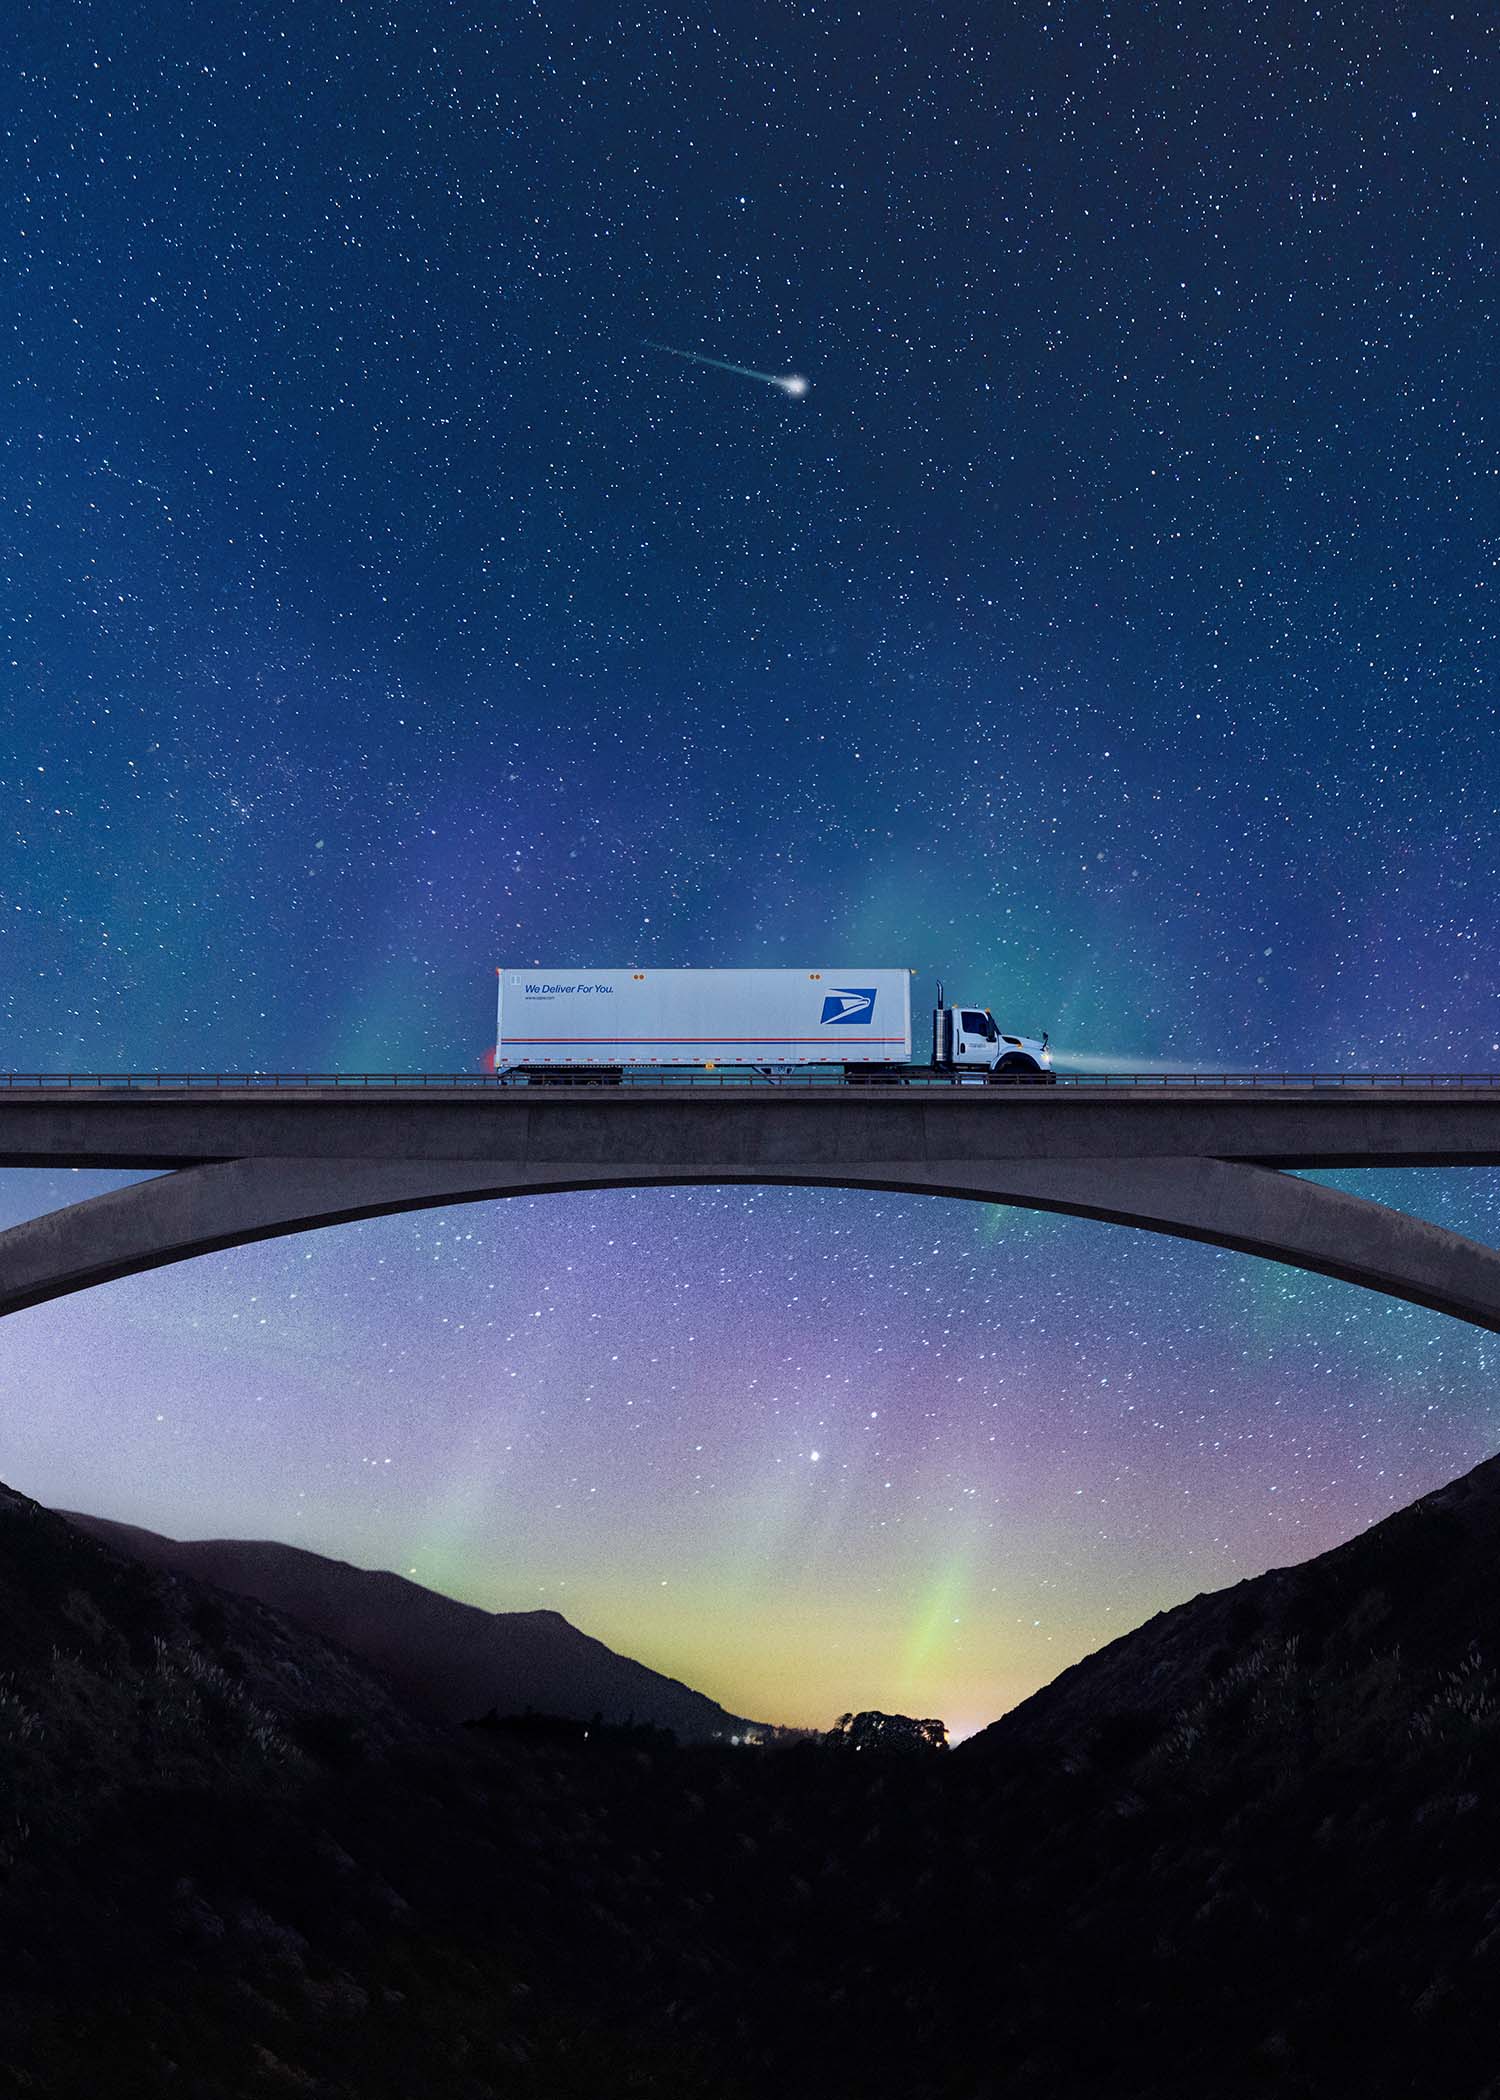 Postal Service Truck on a bridge with a starry magical night sky background